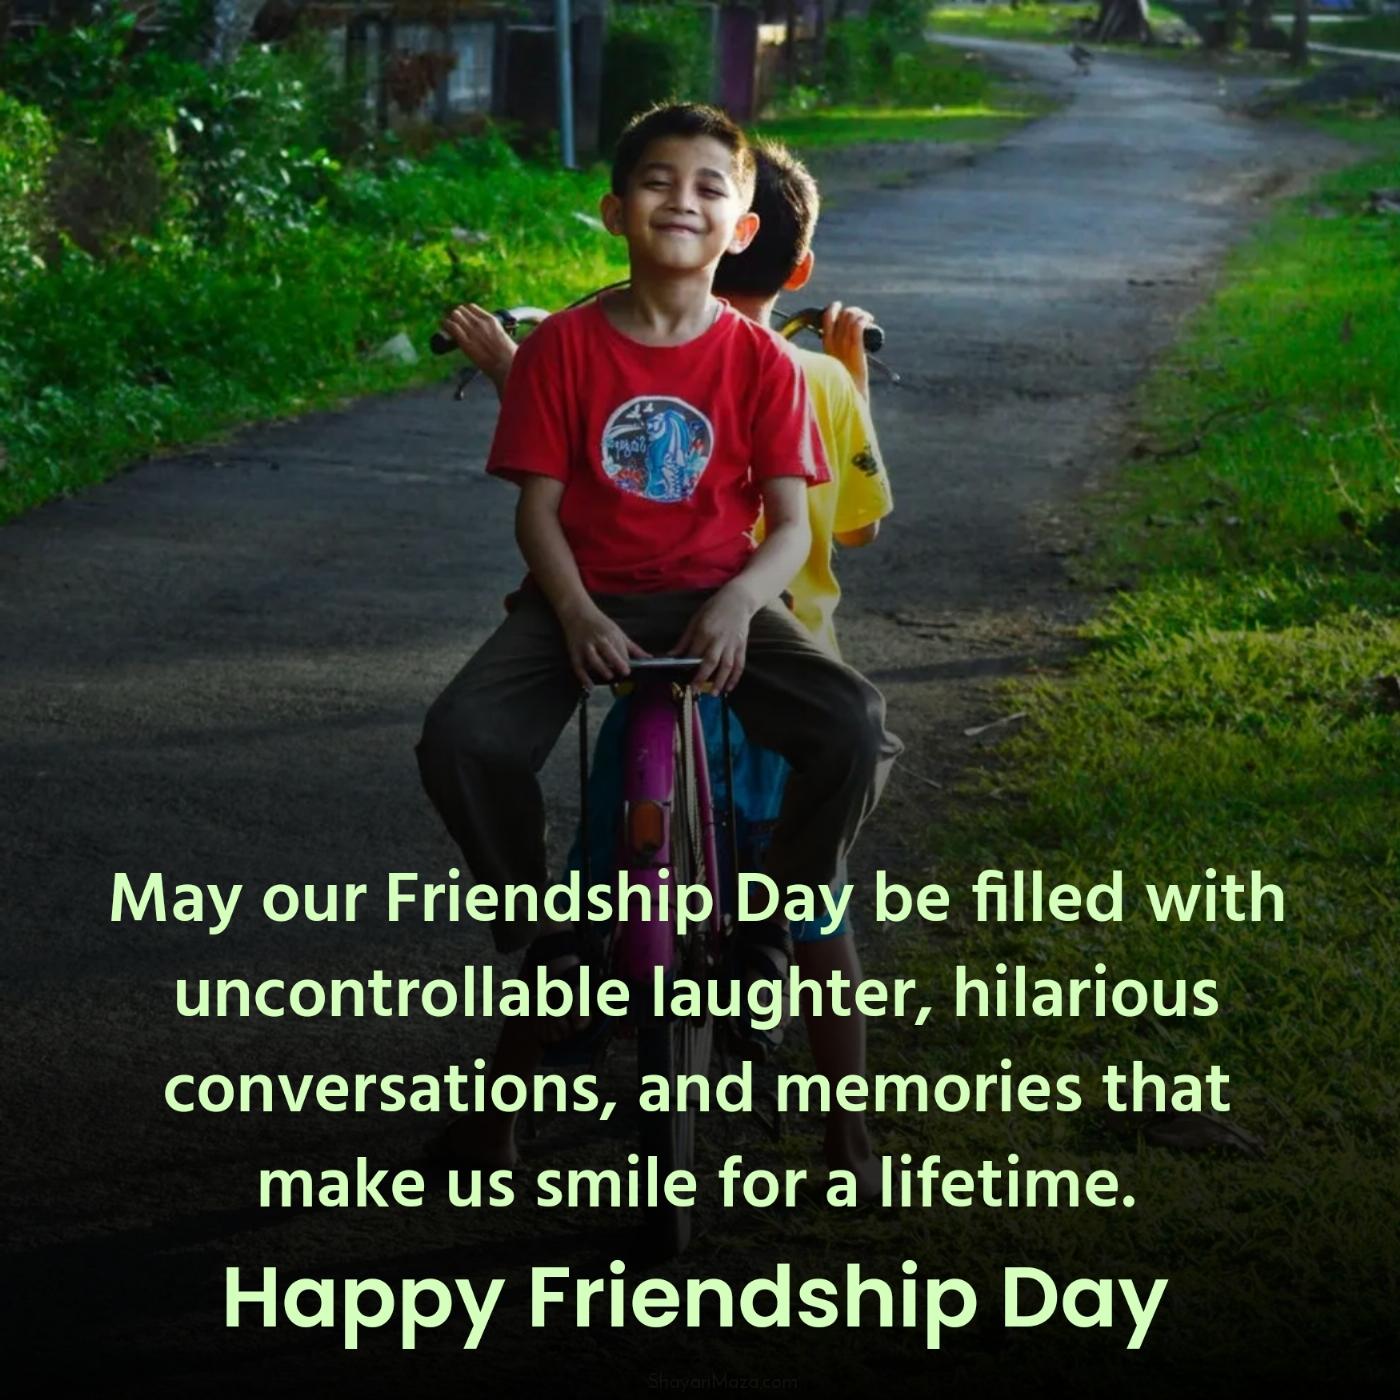 May our Friendship Day be filled with uncontrollable laughter